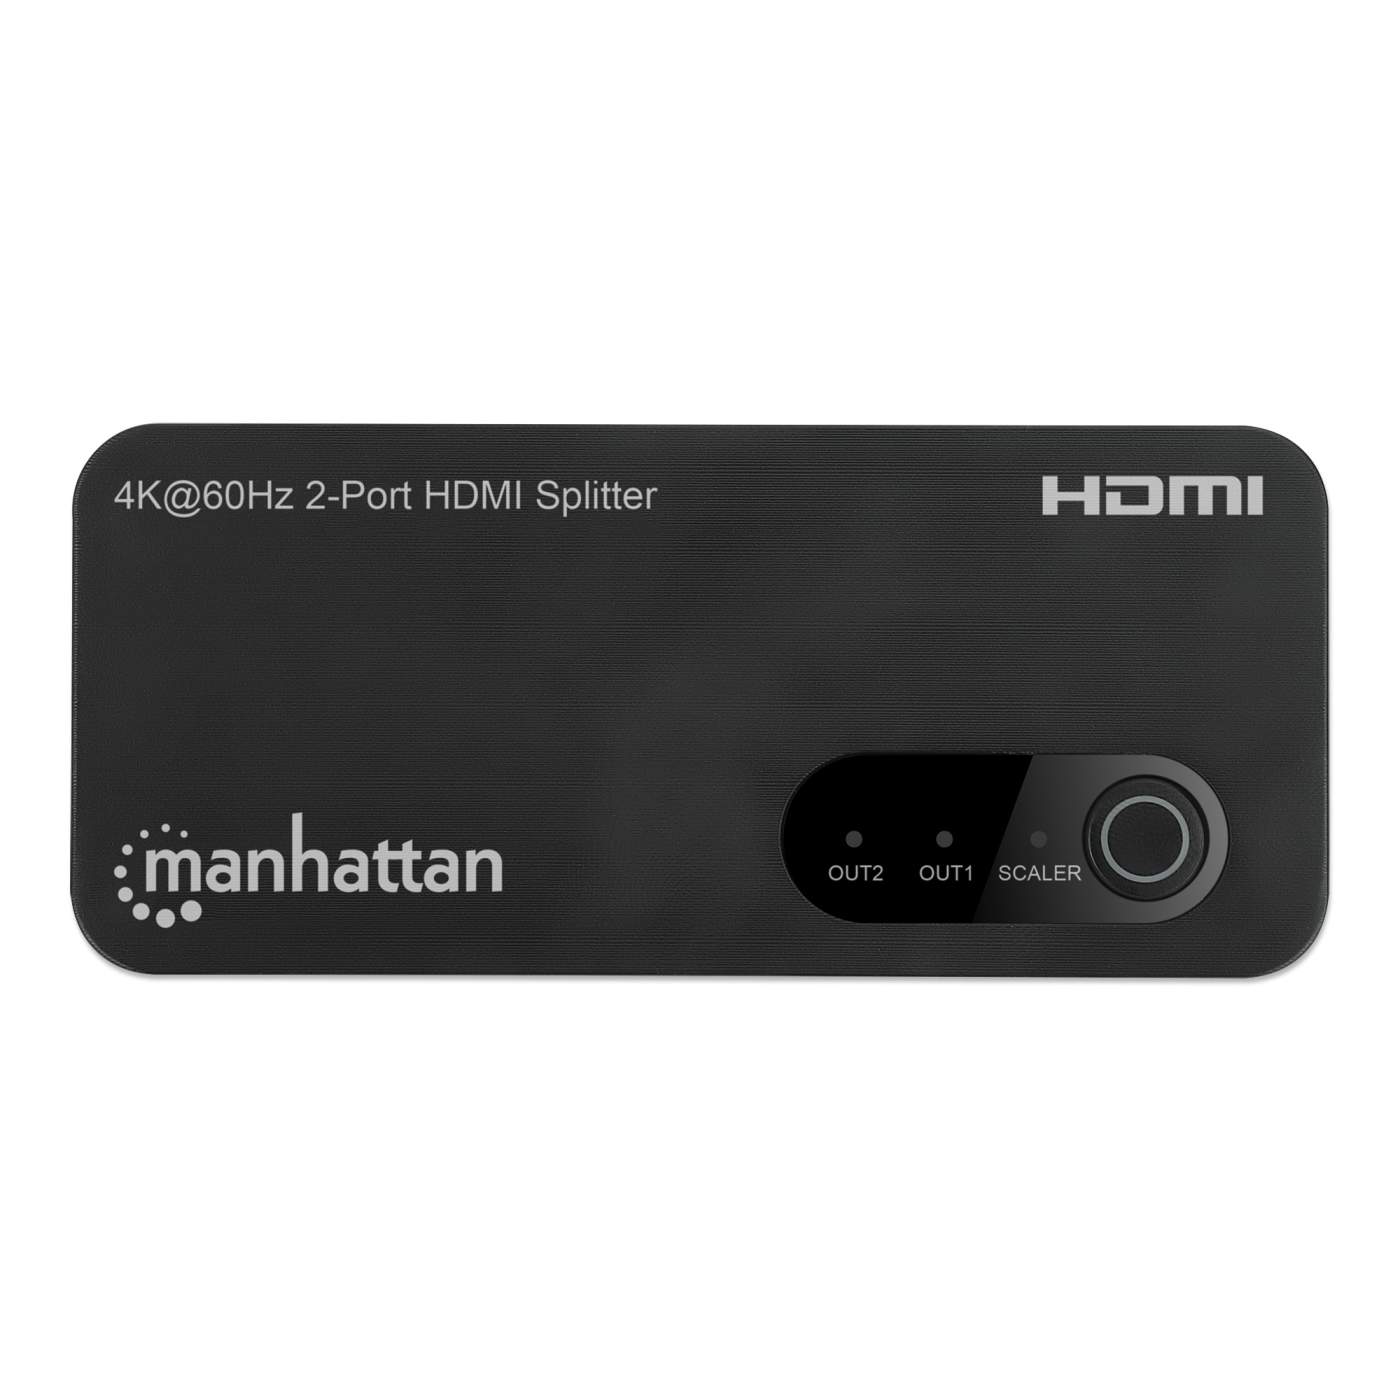 4K@60Hz 2-Port HDMI Splitter with Downscaling Image 8